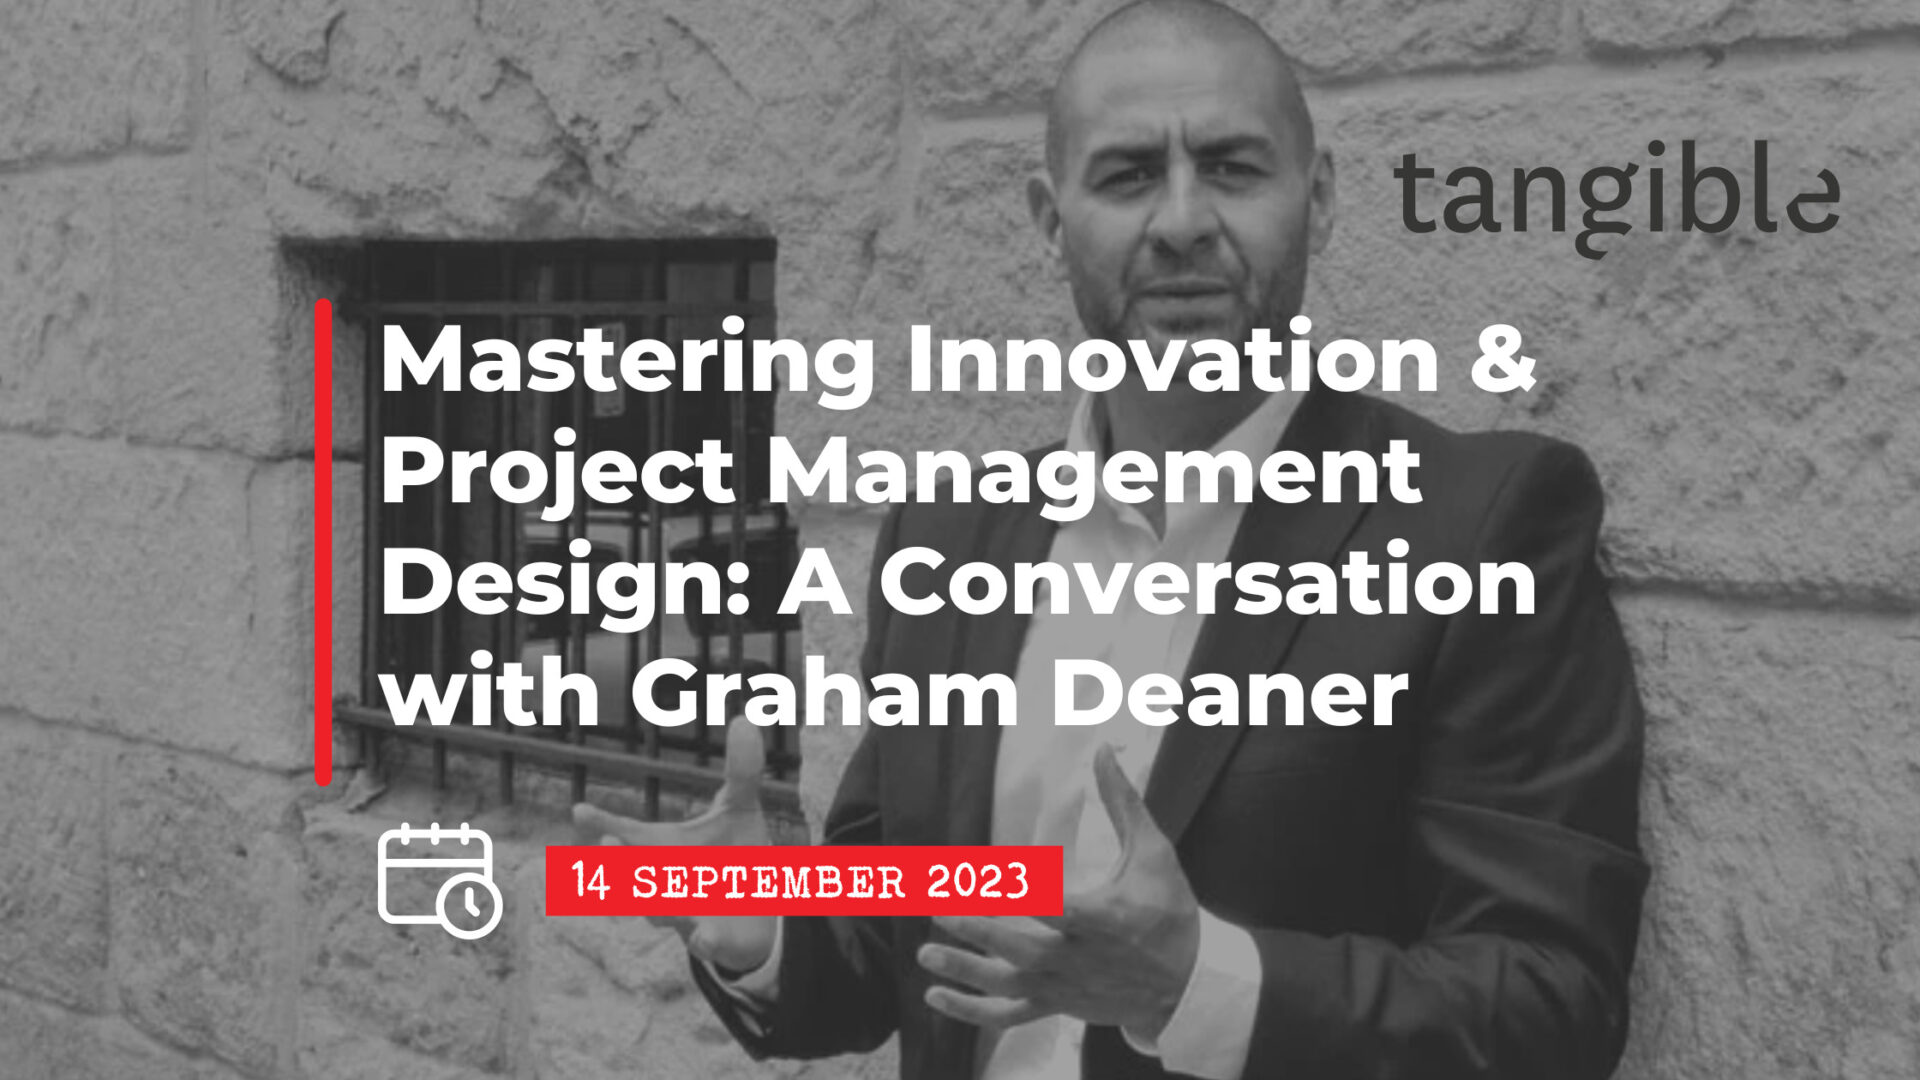 EVENT: 14 September 2023 – Mastering Innovation and Project Management Design: A Conversation with a Multi-Talented Creative Graham Deaner